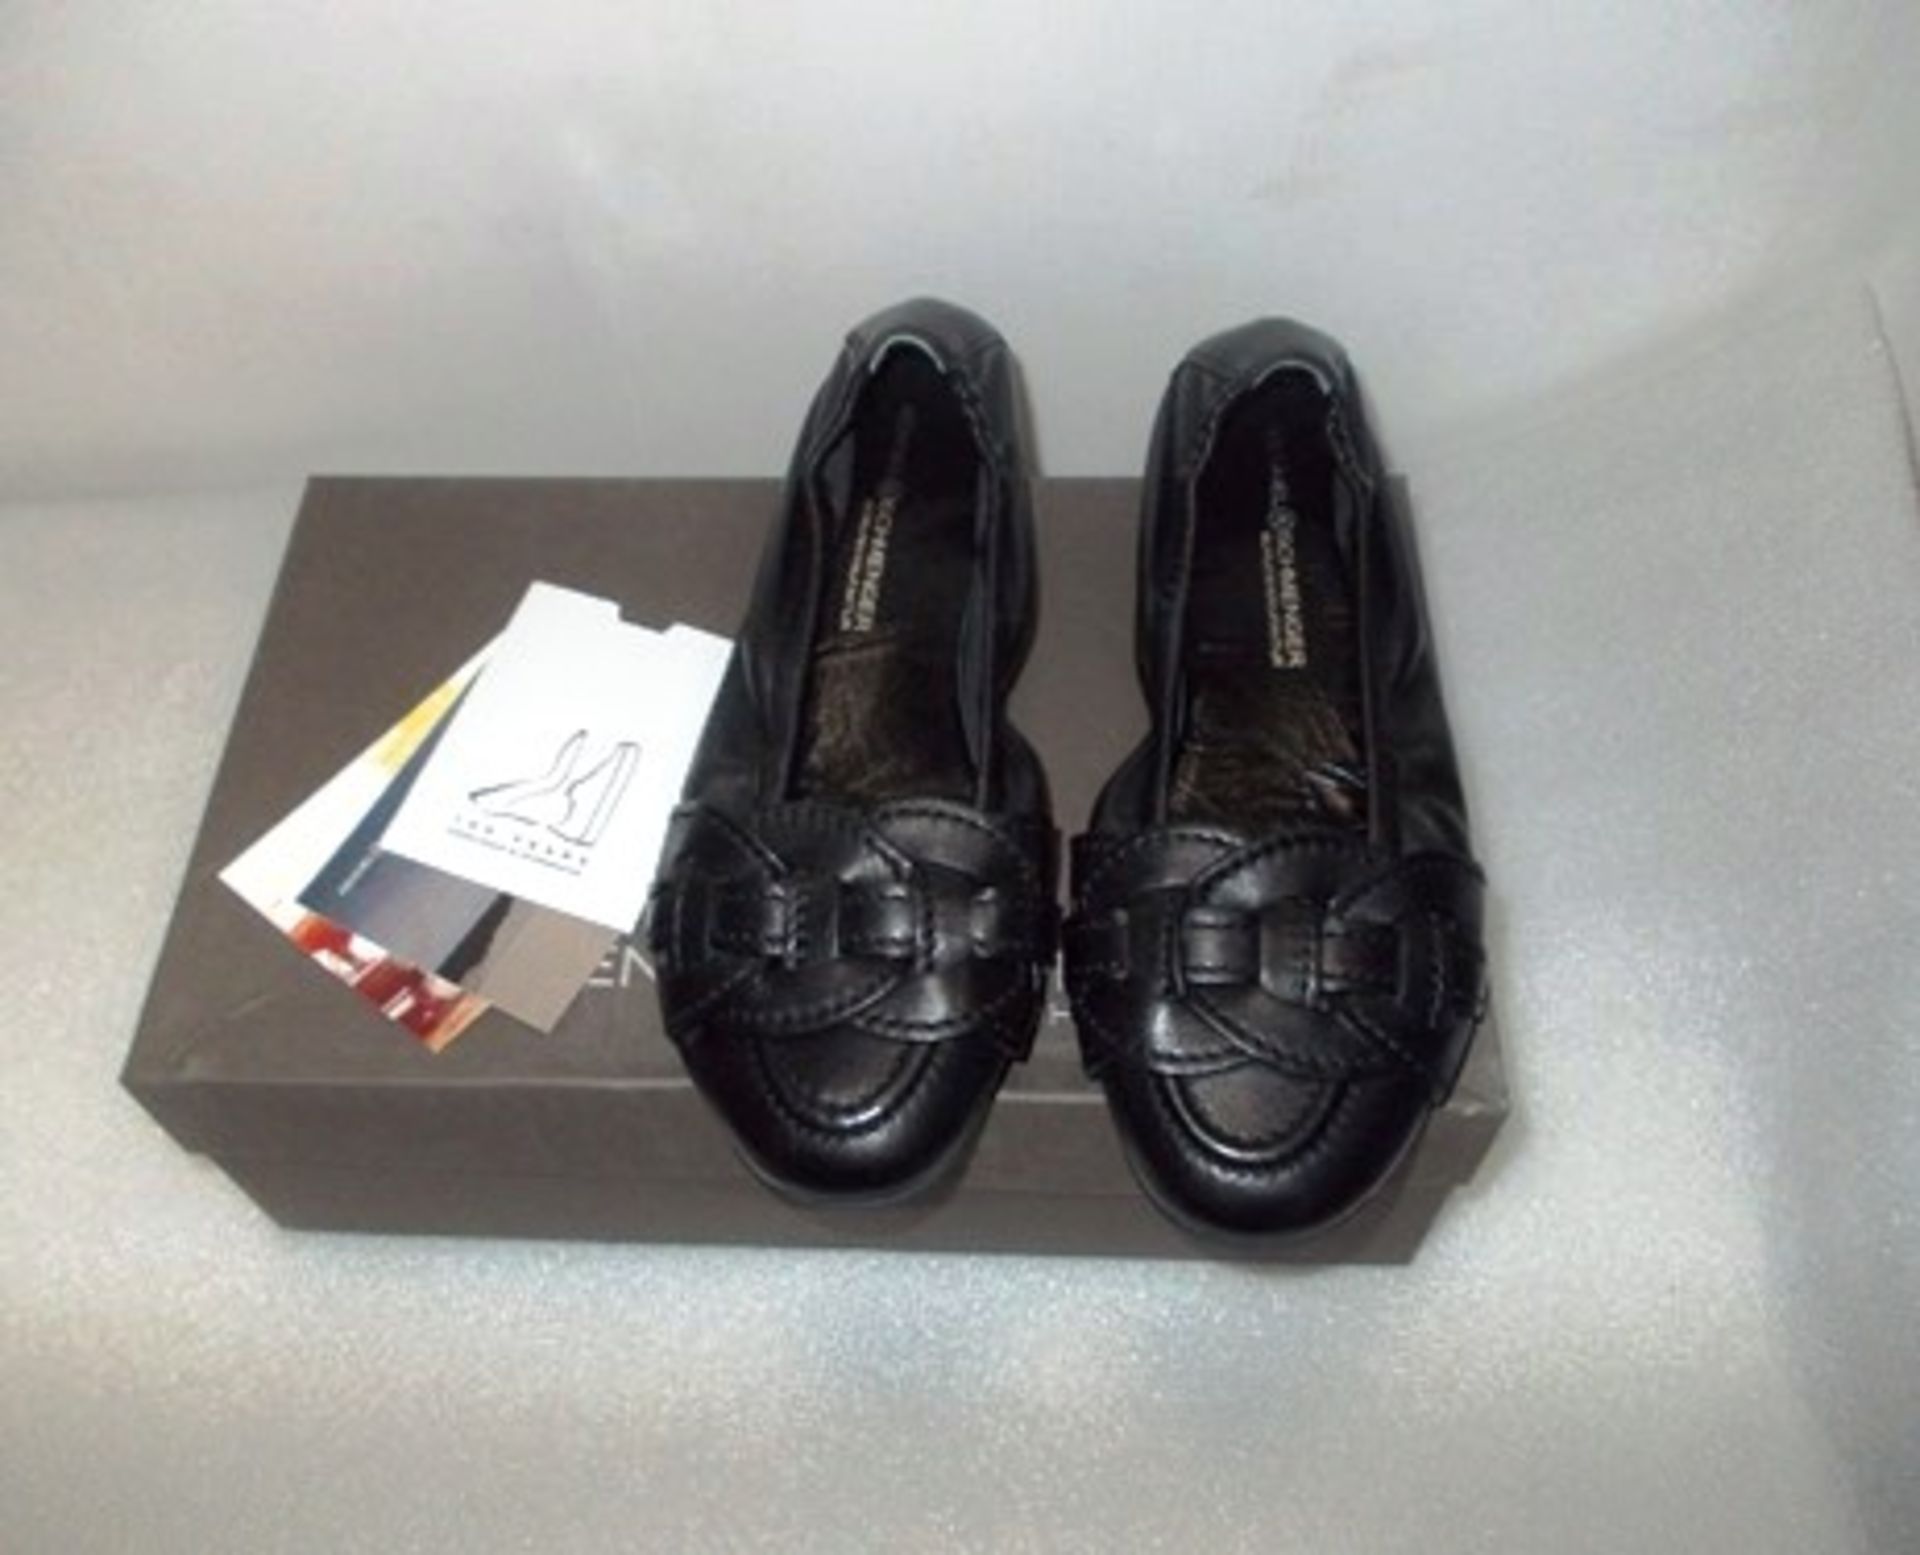 1 x pair of Kennel & Schmenger Malu leather flats, style no. 51-10690-410, UK size 3.5 - New (S15)